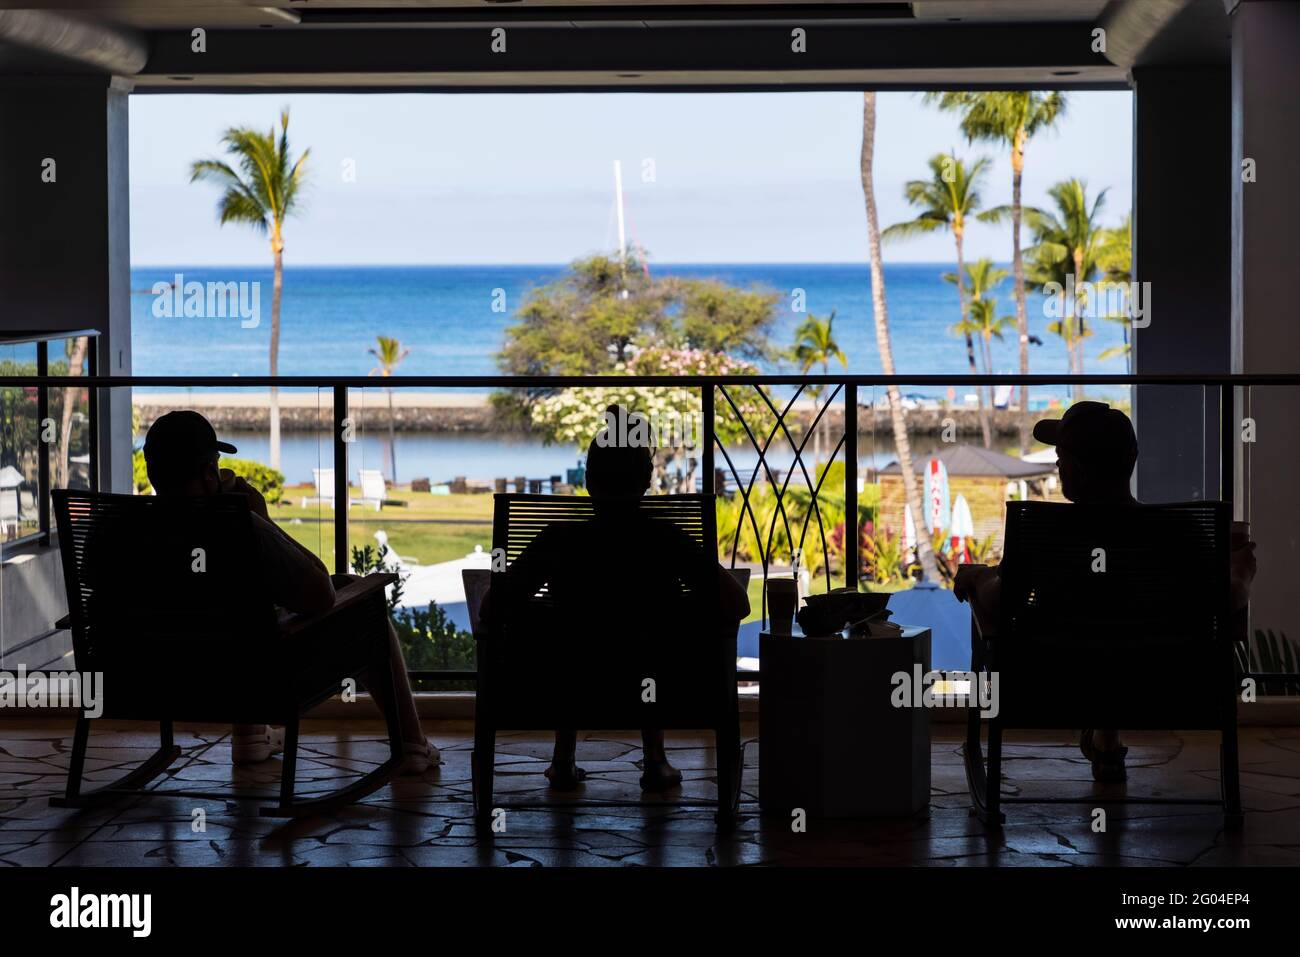 Waikoloa, USA. 24th May, 2021. Tourist begin travel to the big island of Hawaii in a post-pandemic world. Hawaii is now allowing travelers to the island chain as long as they are fully vaccinated and have passed a Covid-19 test within 72 hours of their trip. Guest sitting at the Waikoloa Beach Marriott Resort.5/23/2021 Waikoloa Beach, Hawaii, USA (Photo by Ted Soqui/SIPA USA) Credit: Sipa USA/Alamy Live News Stock Photo